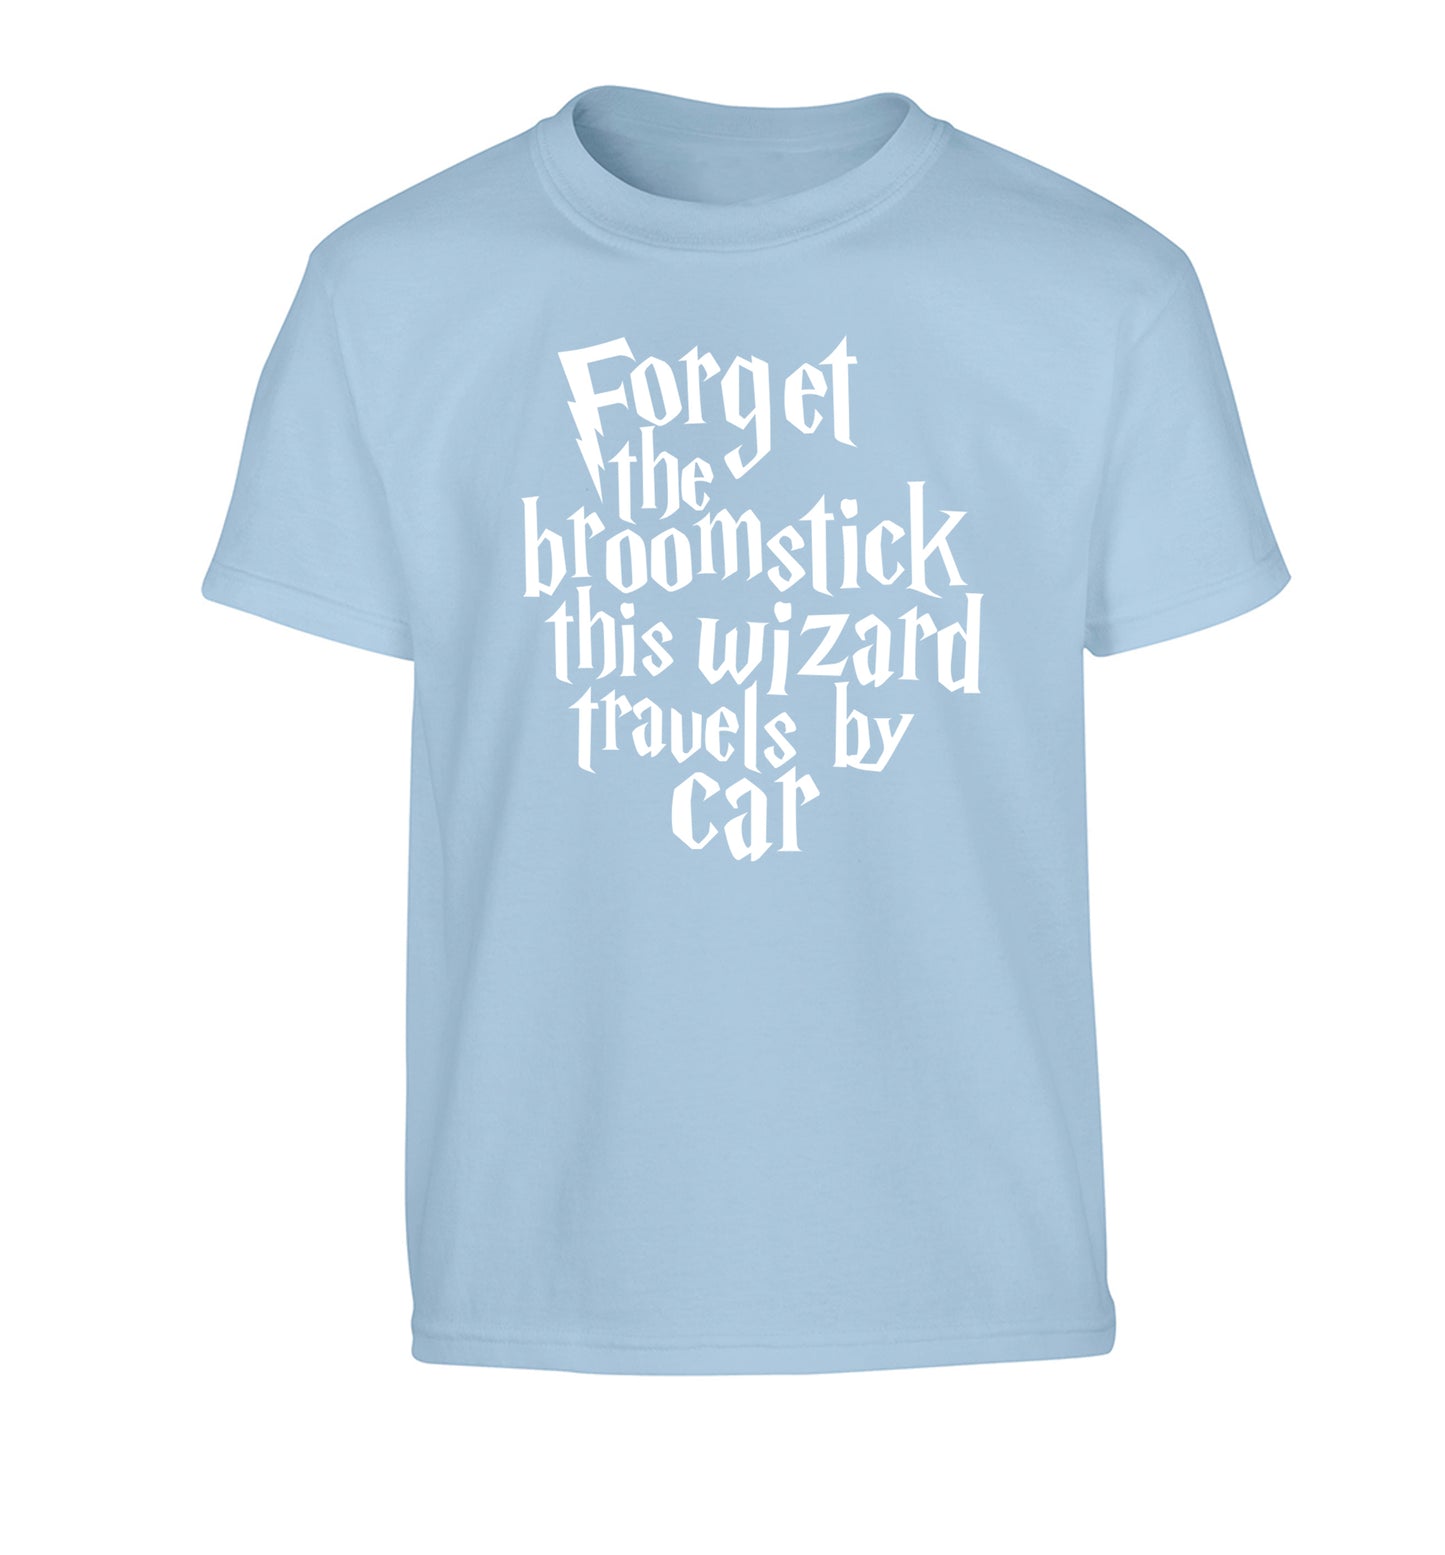 Forget the broomstick this wizard travels by car Children's light blue Tshirt 12-14 Years